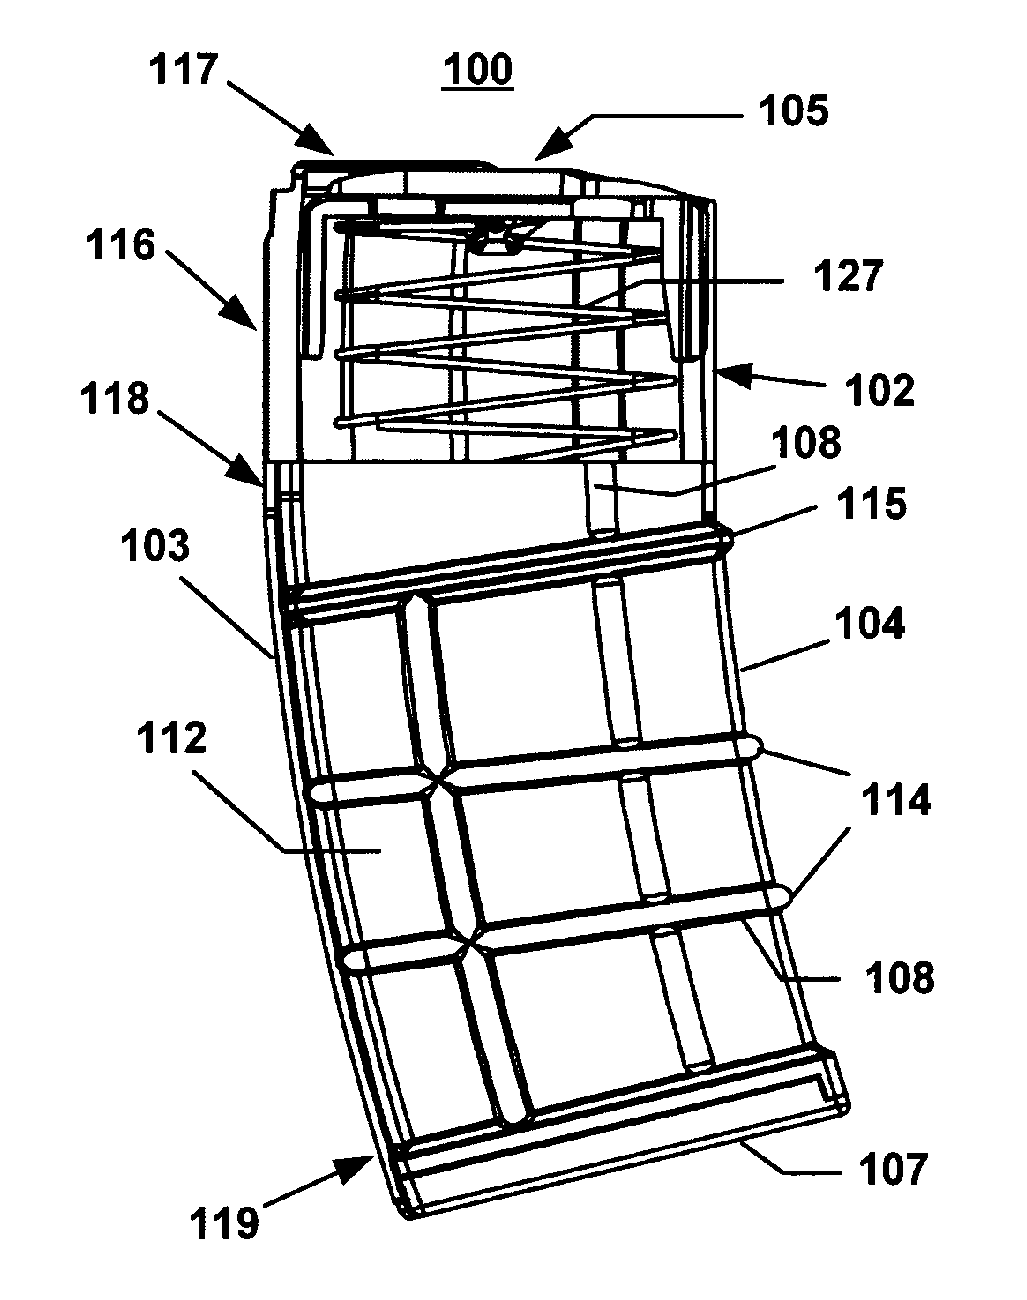 Composite magazine for chambering ammunition in a firearm